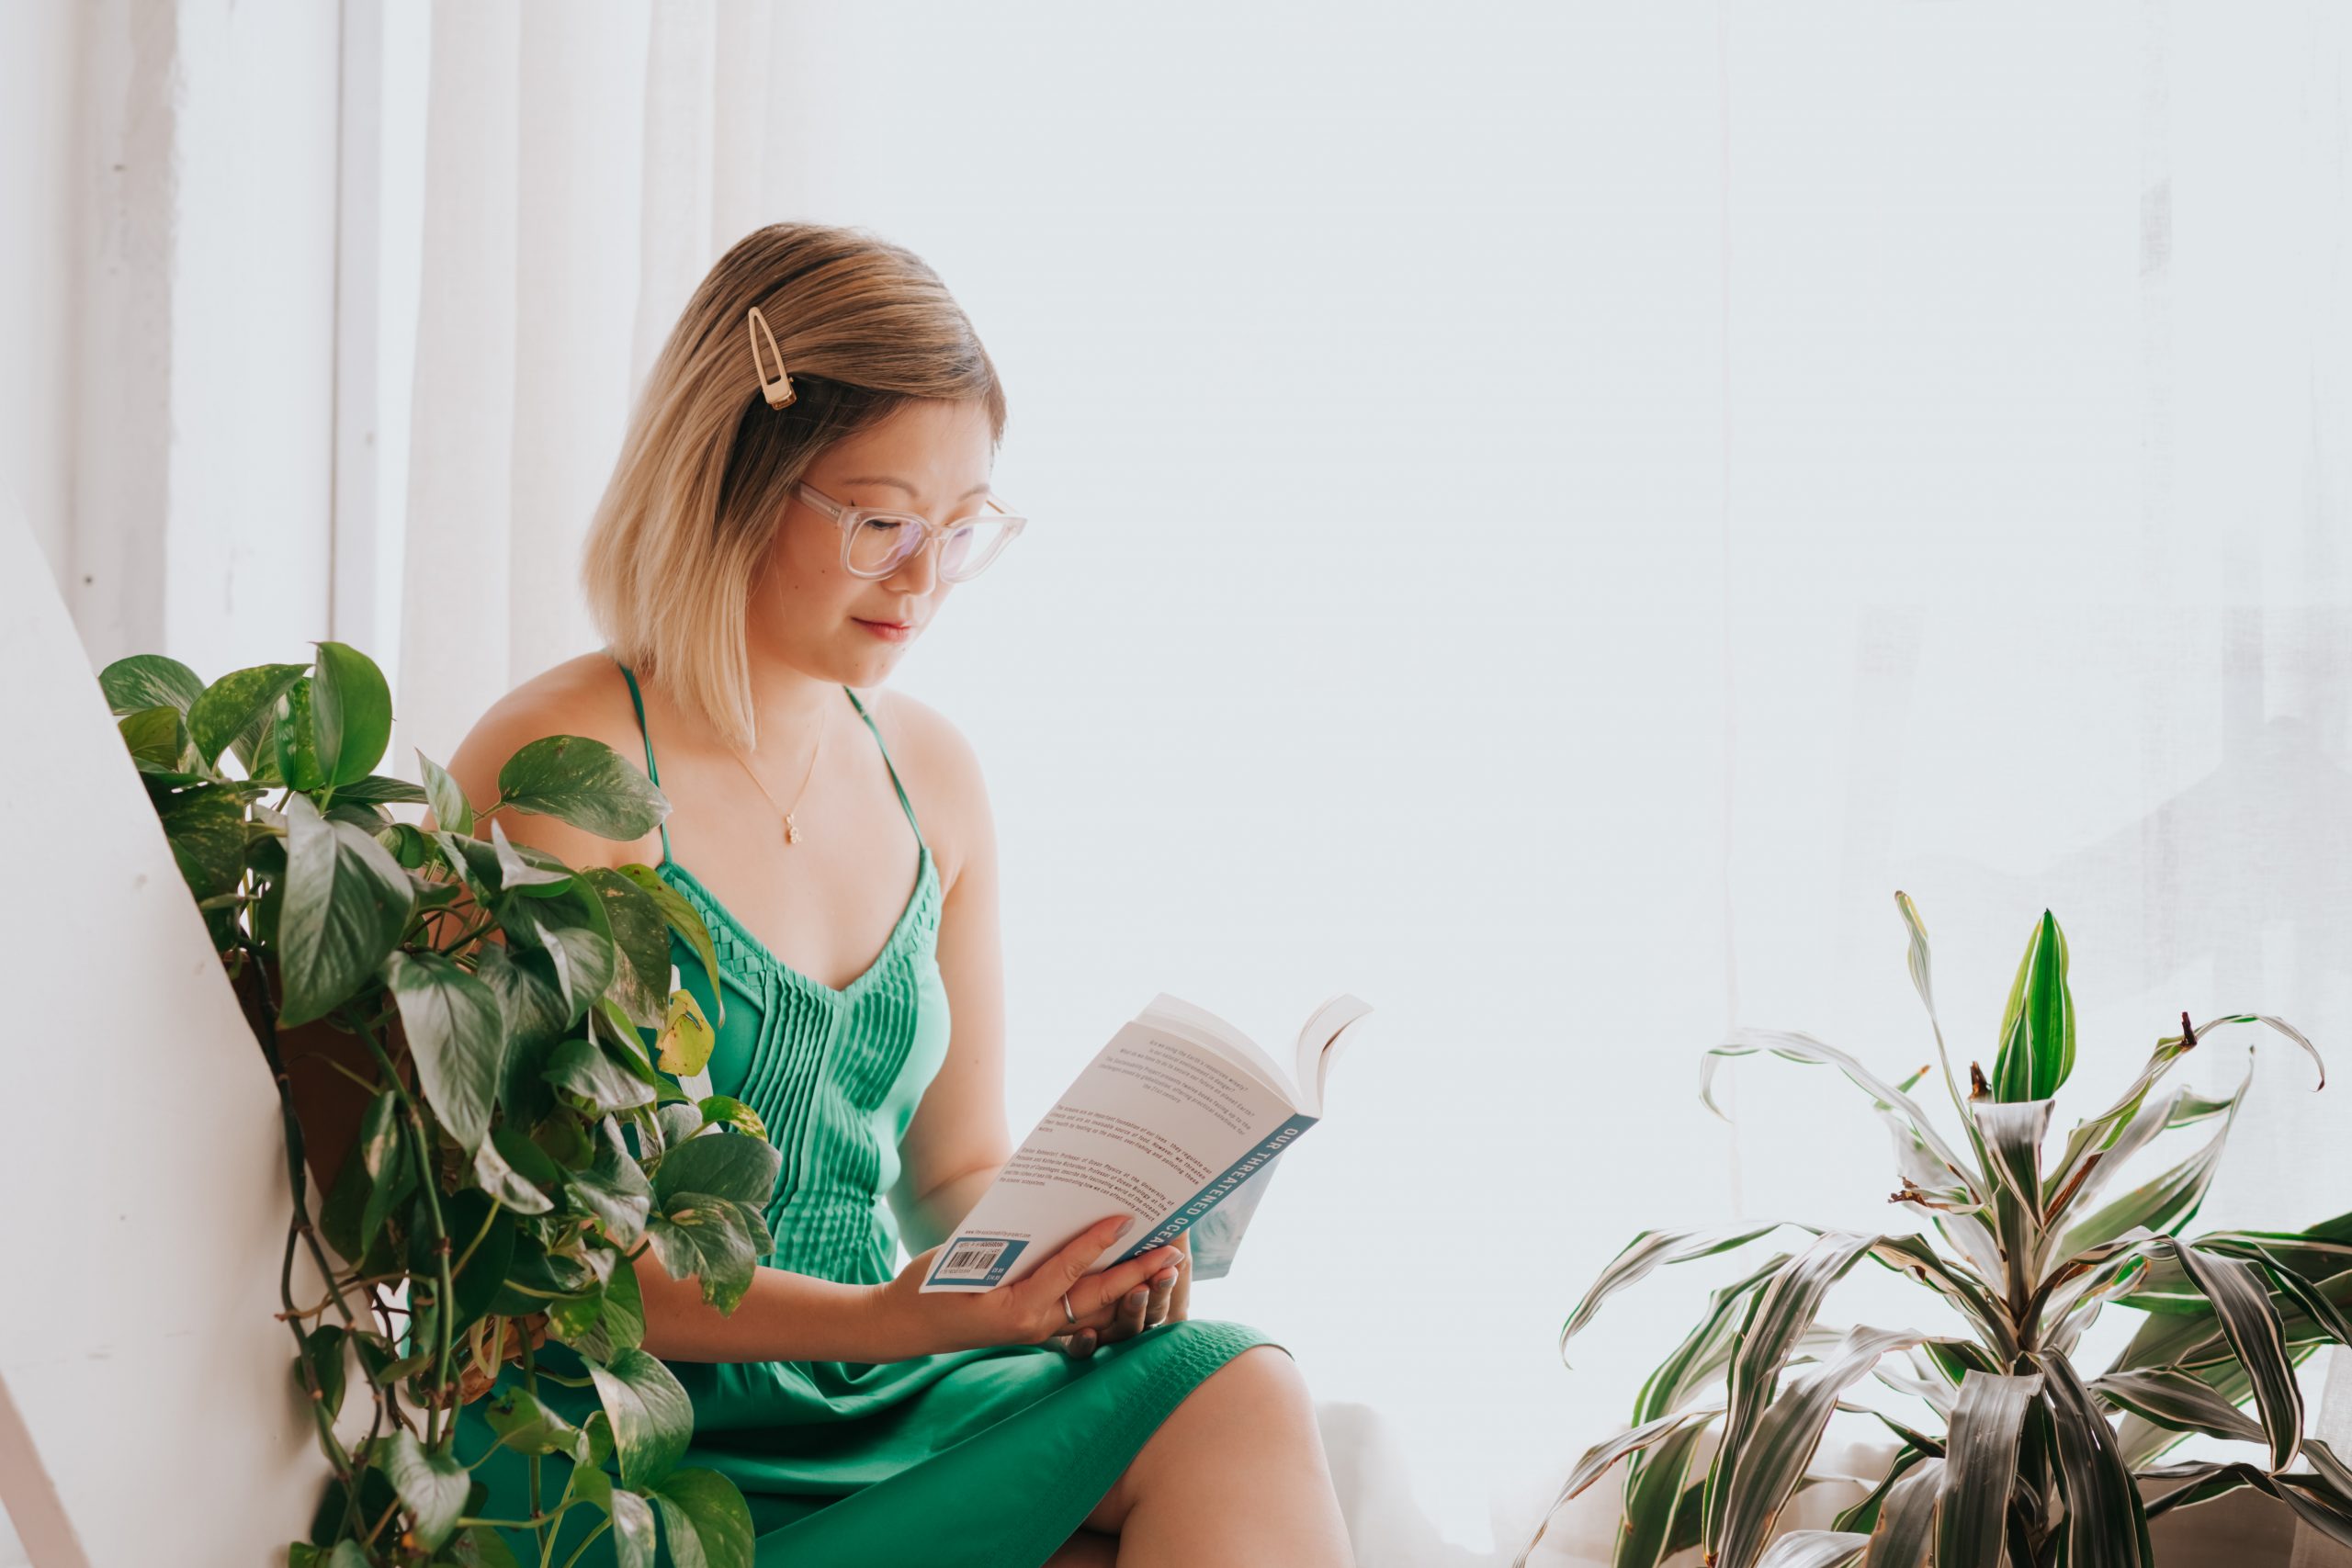 Woman in a green dress is sitting down and reading a book surrounded by plants